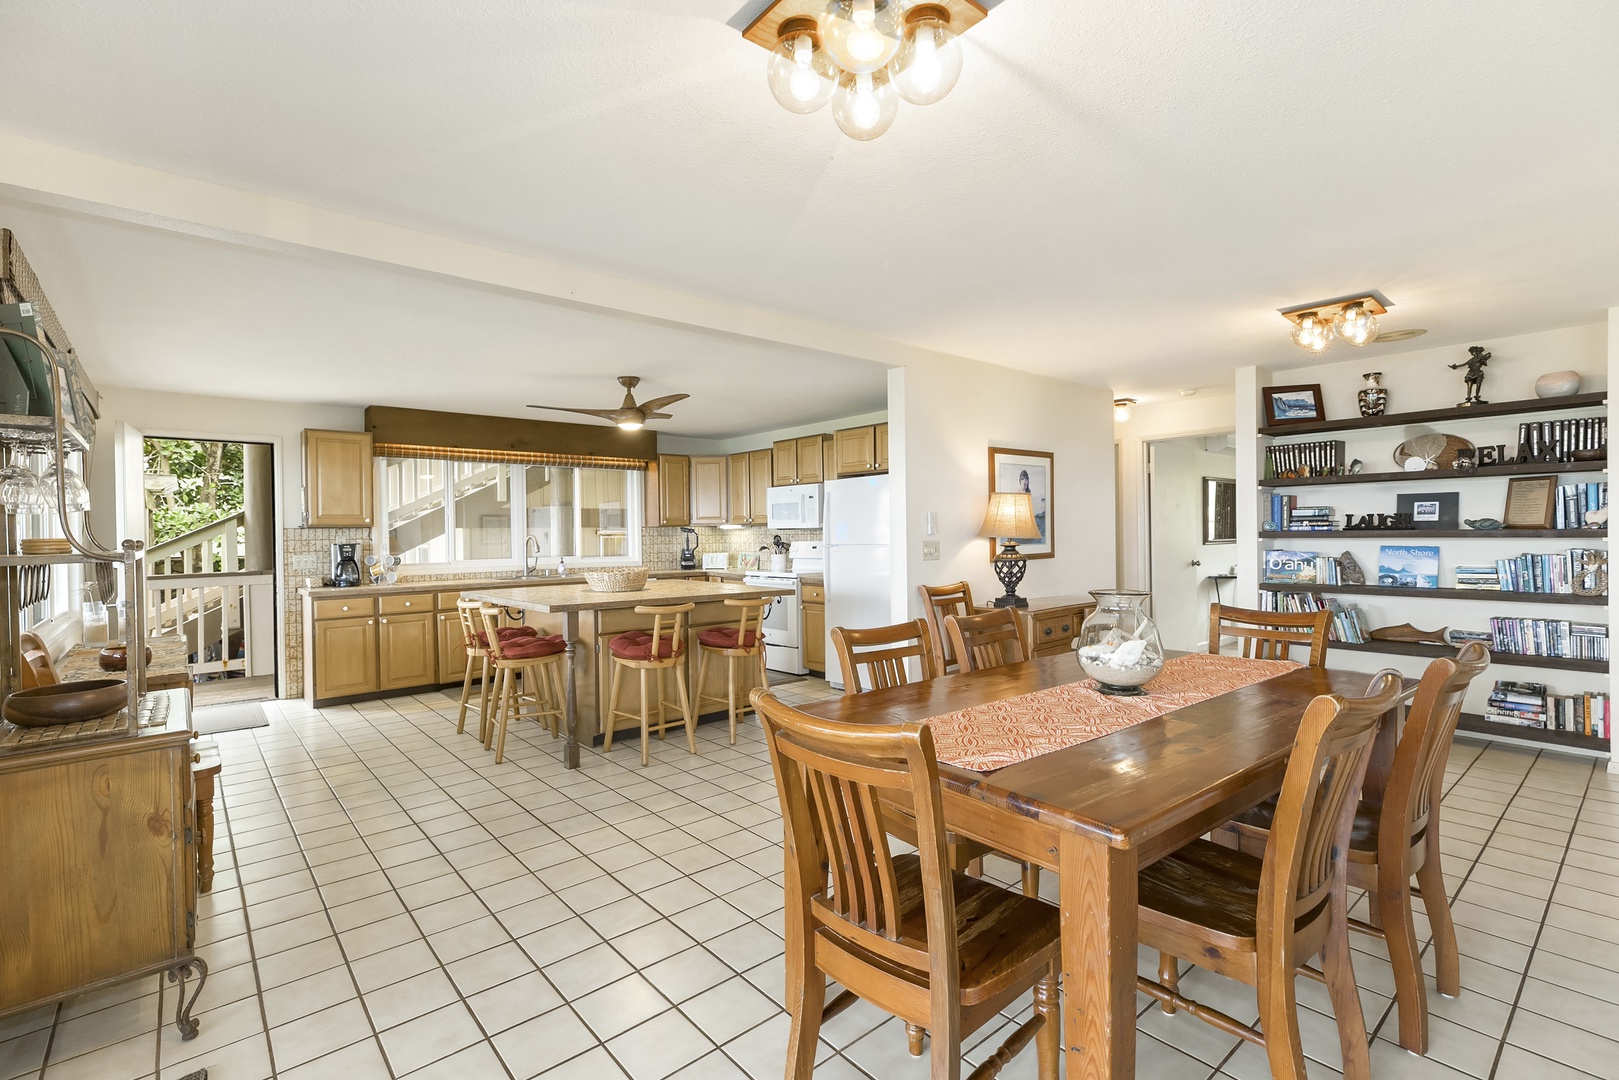 Haleiwa Vacation Rentals, Hale Kimo - The dining area is adjacent to the kitchen with open living spaces.